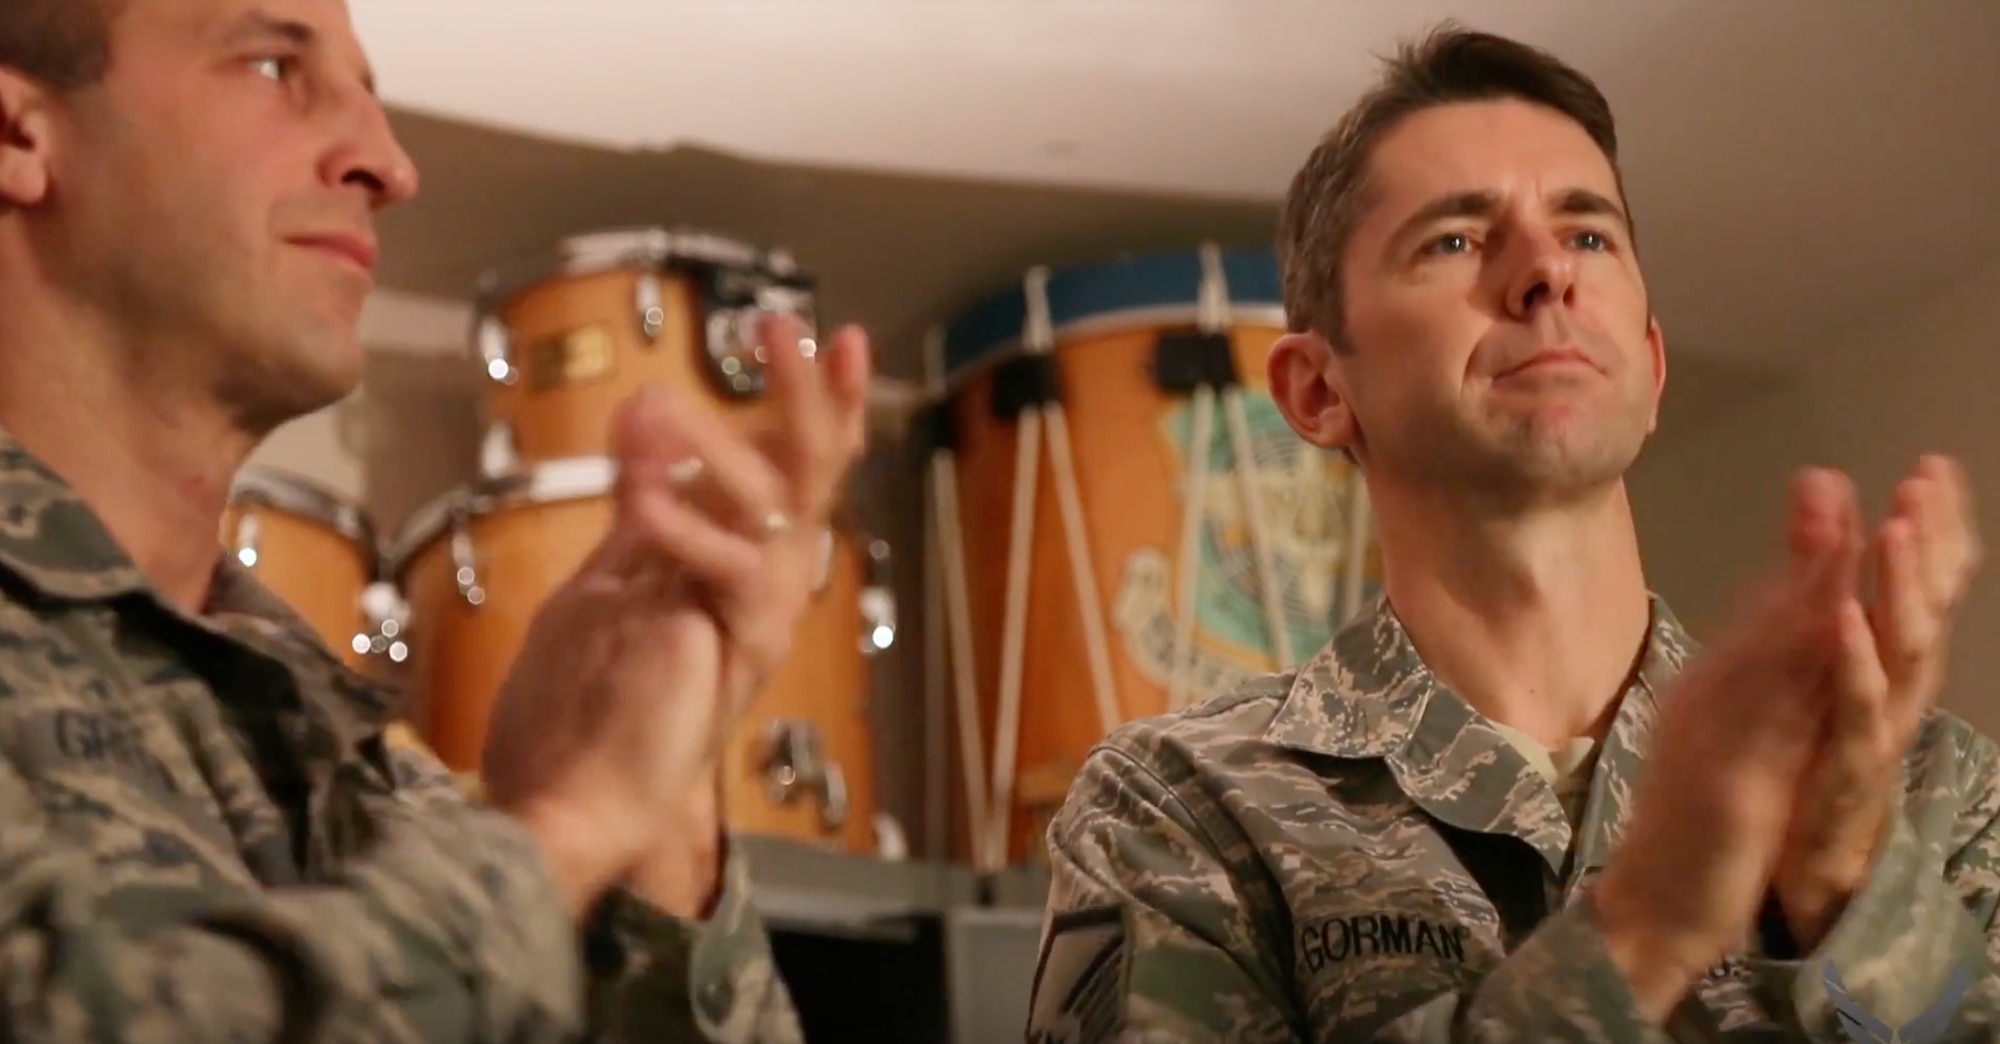 In this month’s installment of “On the Fly,” we are excited to share Steve Reich’s 1972 minimalist classic “Clapping Music,” as performed by percussionists and Concert Band members Master Sgt Randy Gorman and Master Sgt. Adam Green.